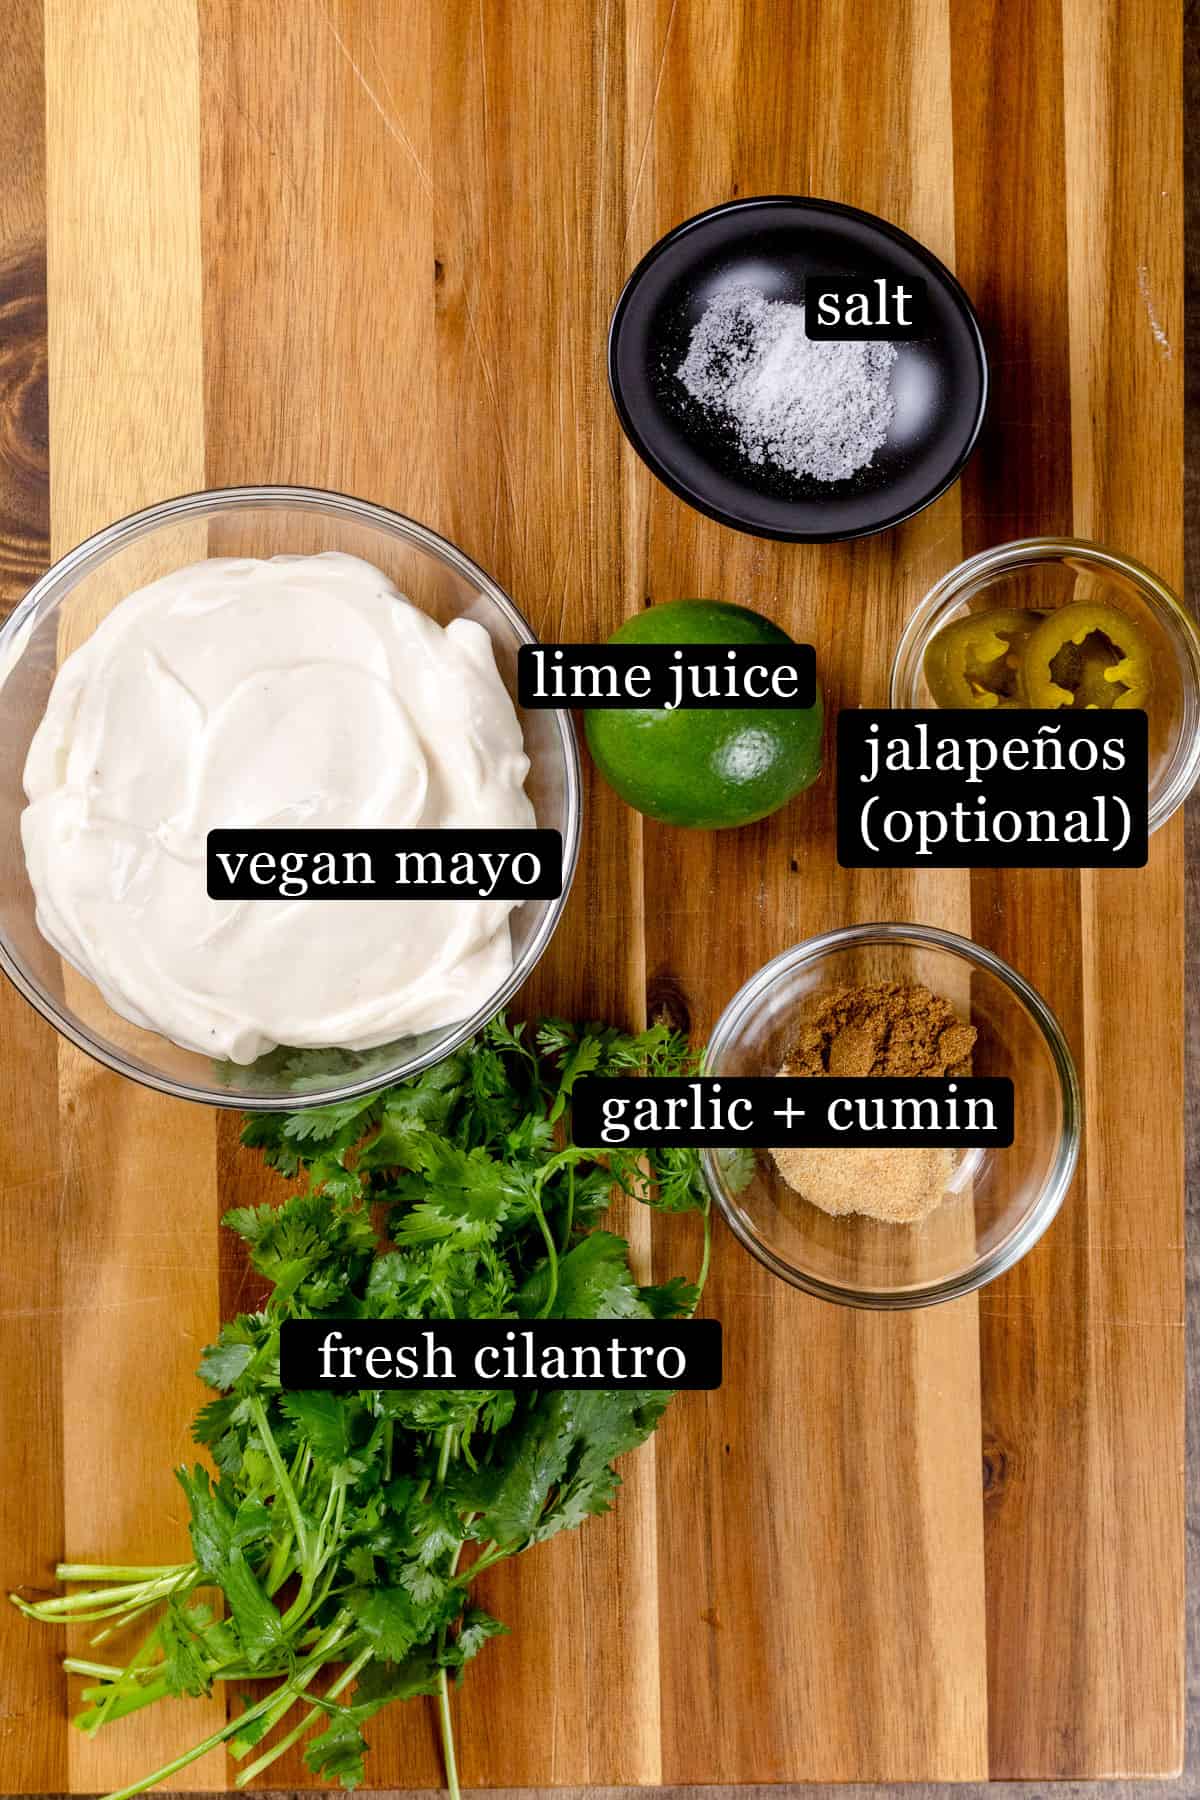 Ingredients for the cilantro aioli sauce in various glass bowls on a wood tabletop. Black and white labels have been added to name each ingredient, like fresh cilantro and vegan mayo.